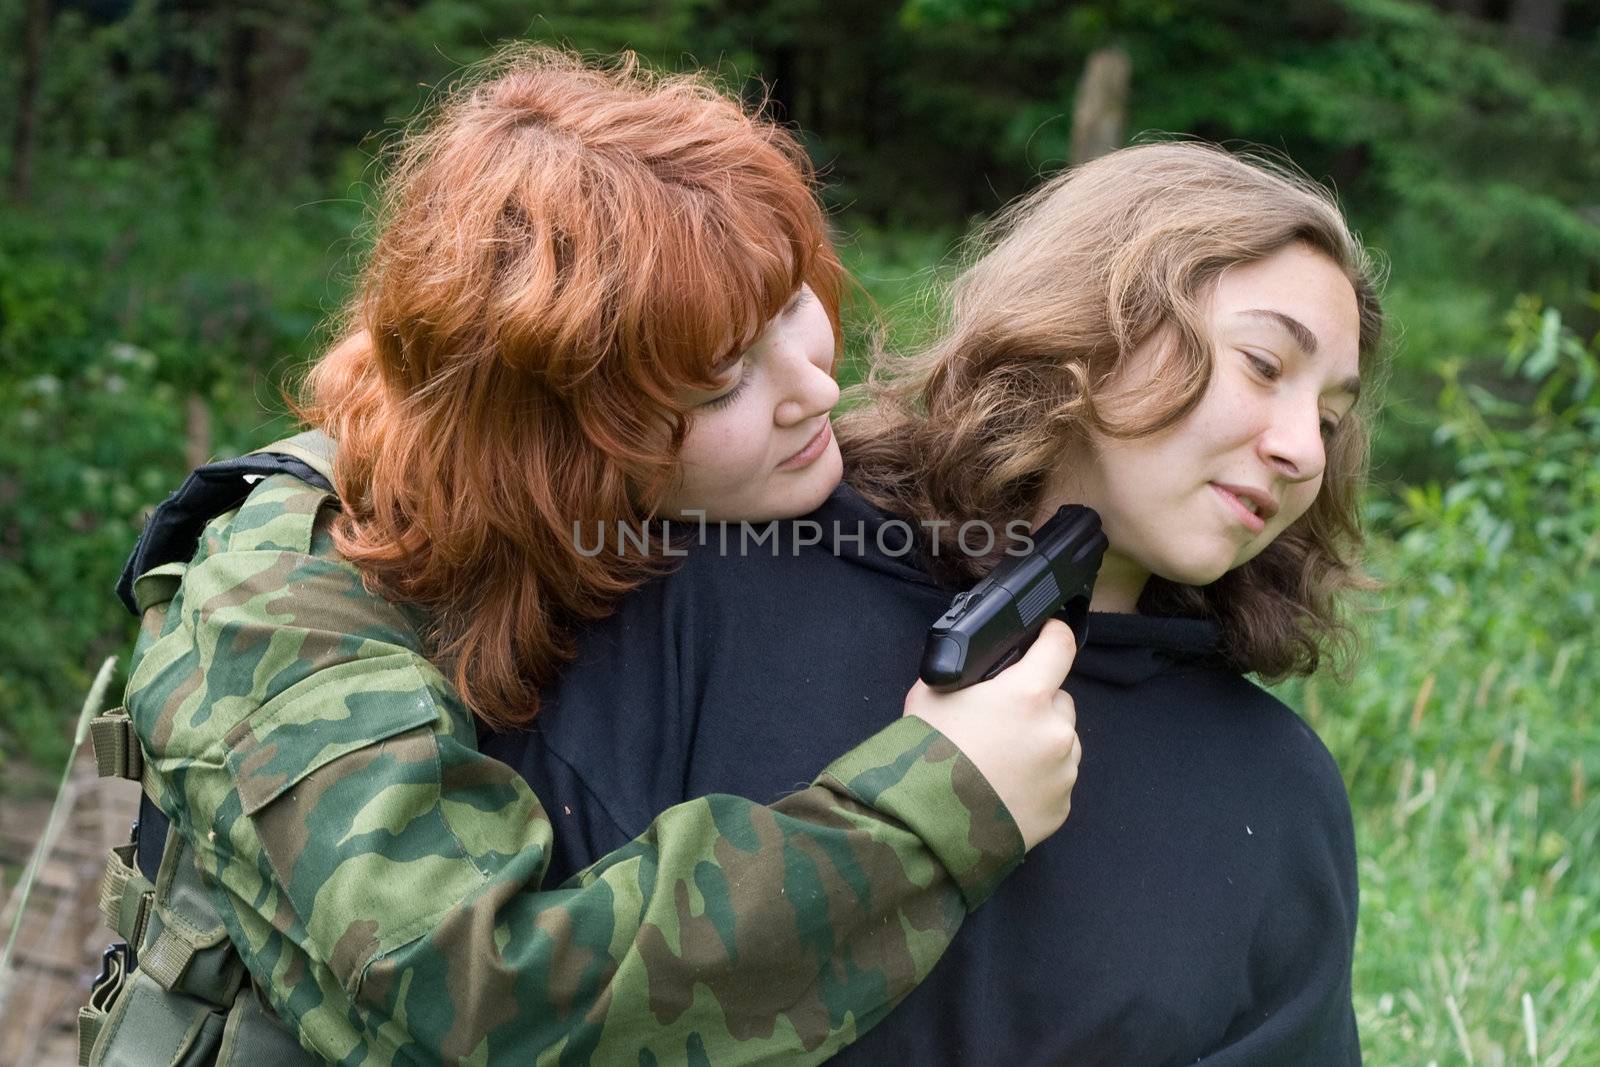 Airsoft thriller: two girls and pistol
